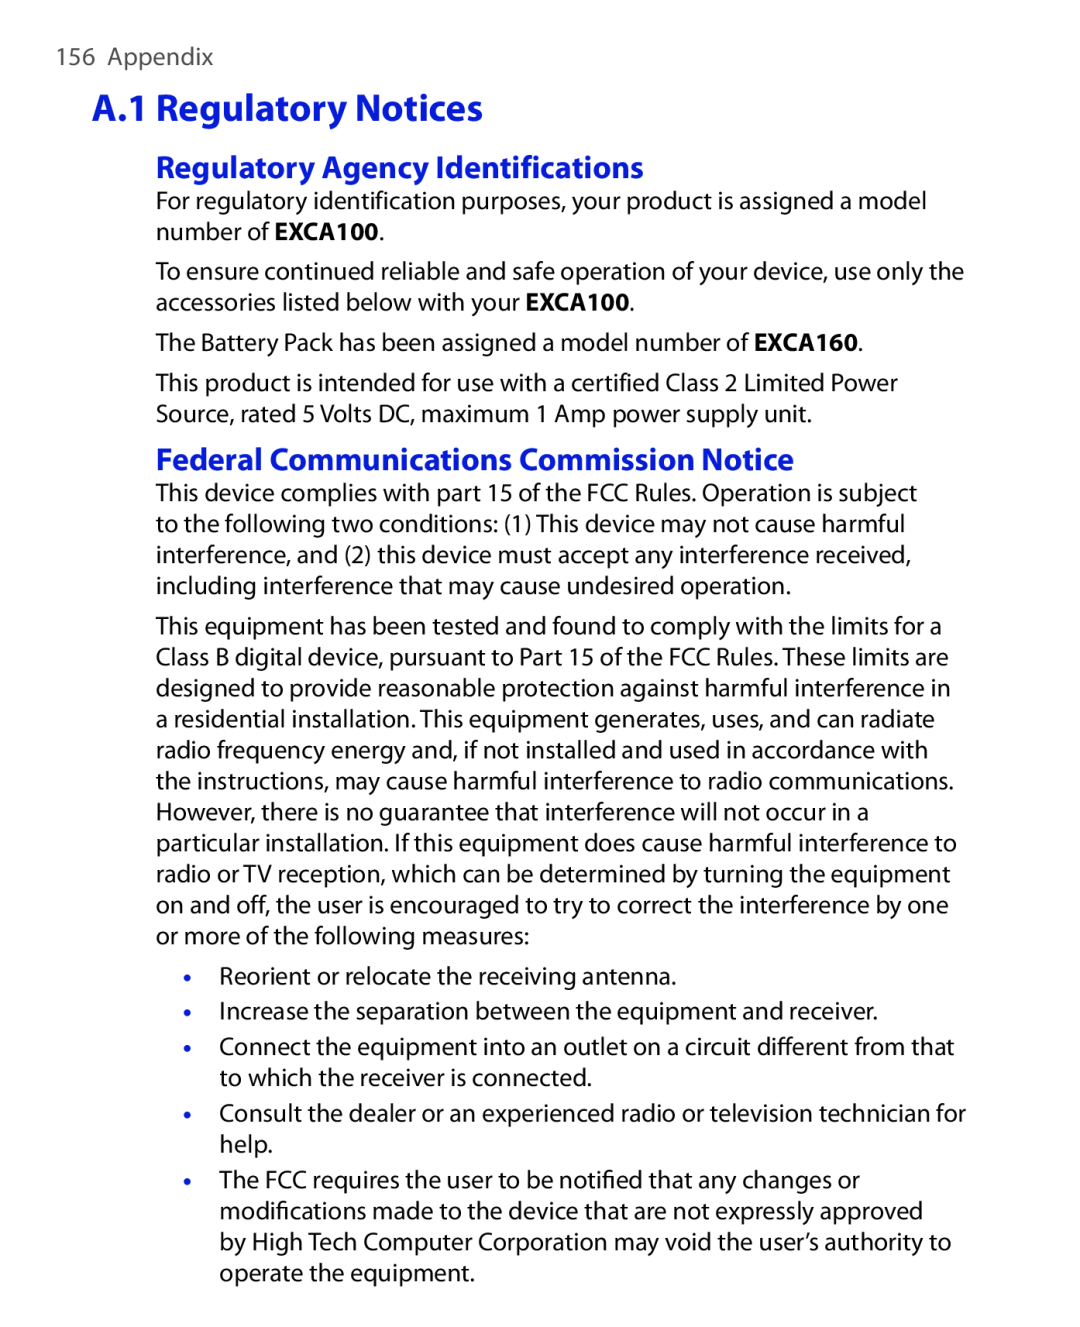 HTC HTC S621 A.1 Regulatory Notices, Regulatory Agency Identifications, Federal Communications Commission Notice, Appendix 